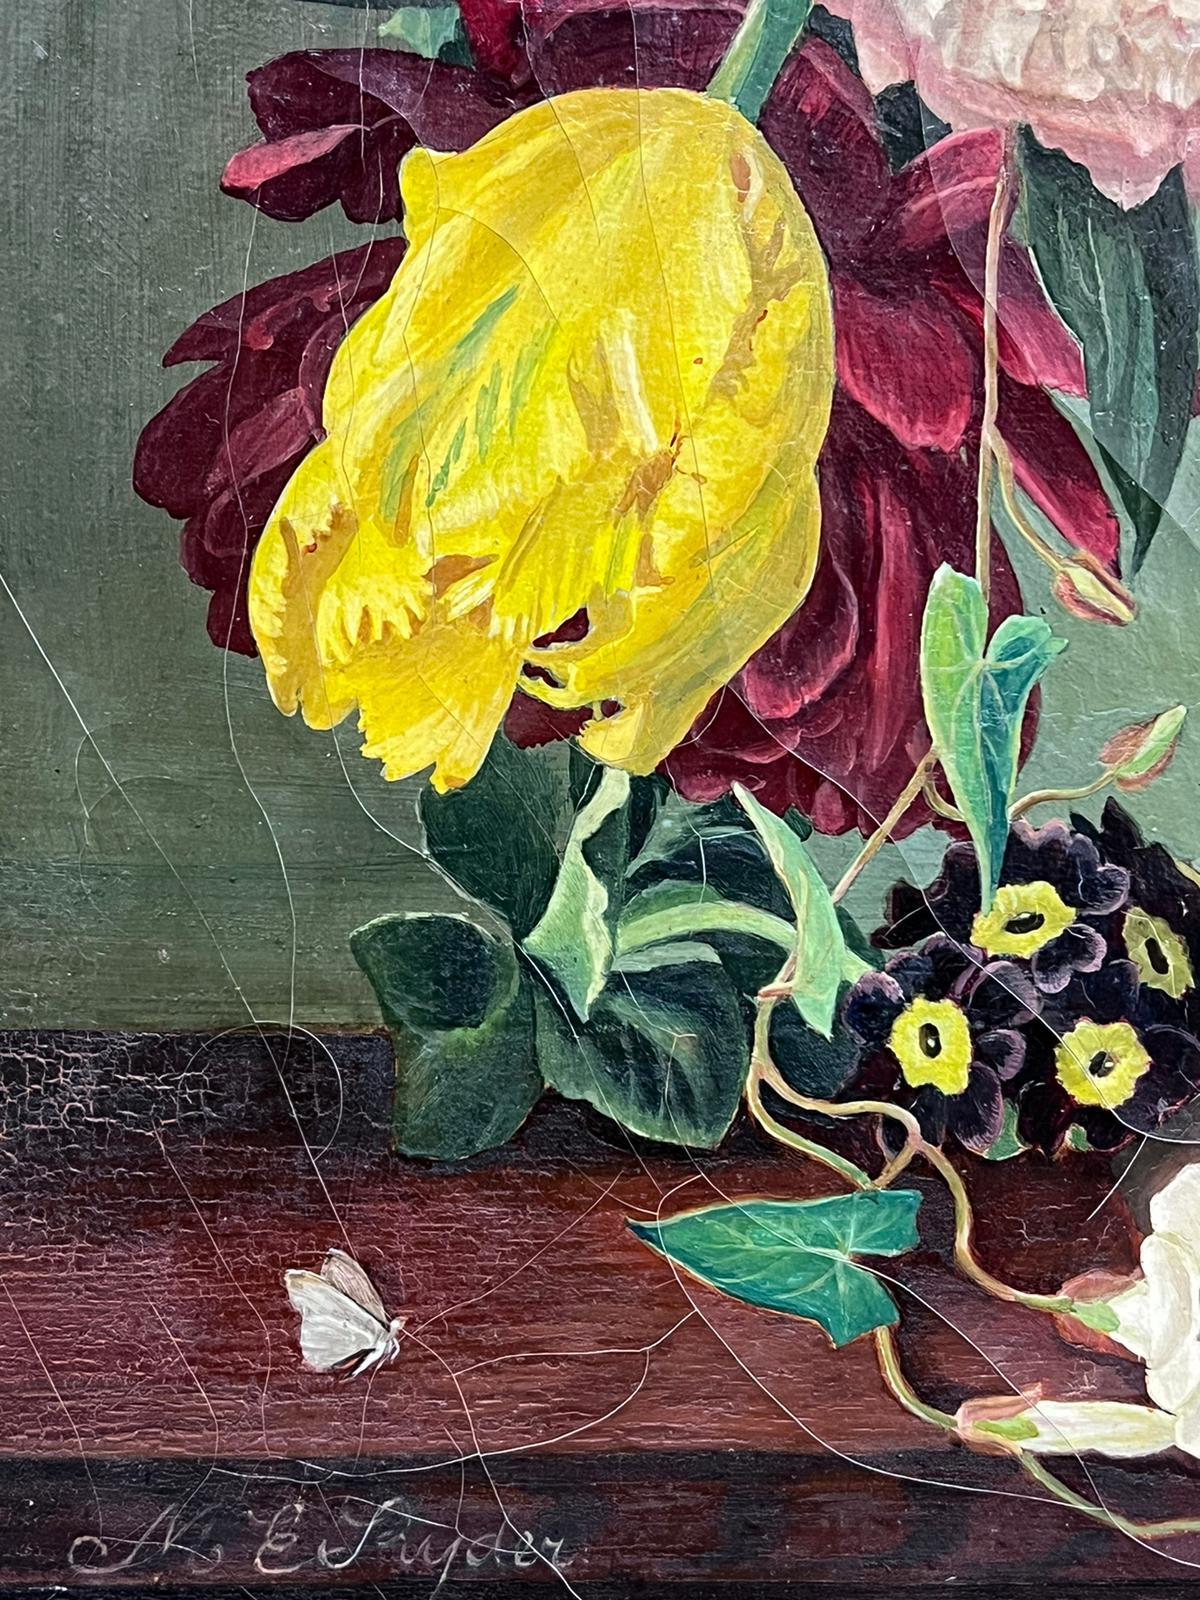 'Summer Flowers'
by Margaret Ryder (British b. 1908)
signed oil on canvas, framed
frame: 33 x 26 inches
canvas: 27 x 20 inches
provenance: private collection, UK
Exhibited at the Royal Institute of Oil Painters, London
condition: very good and sound